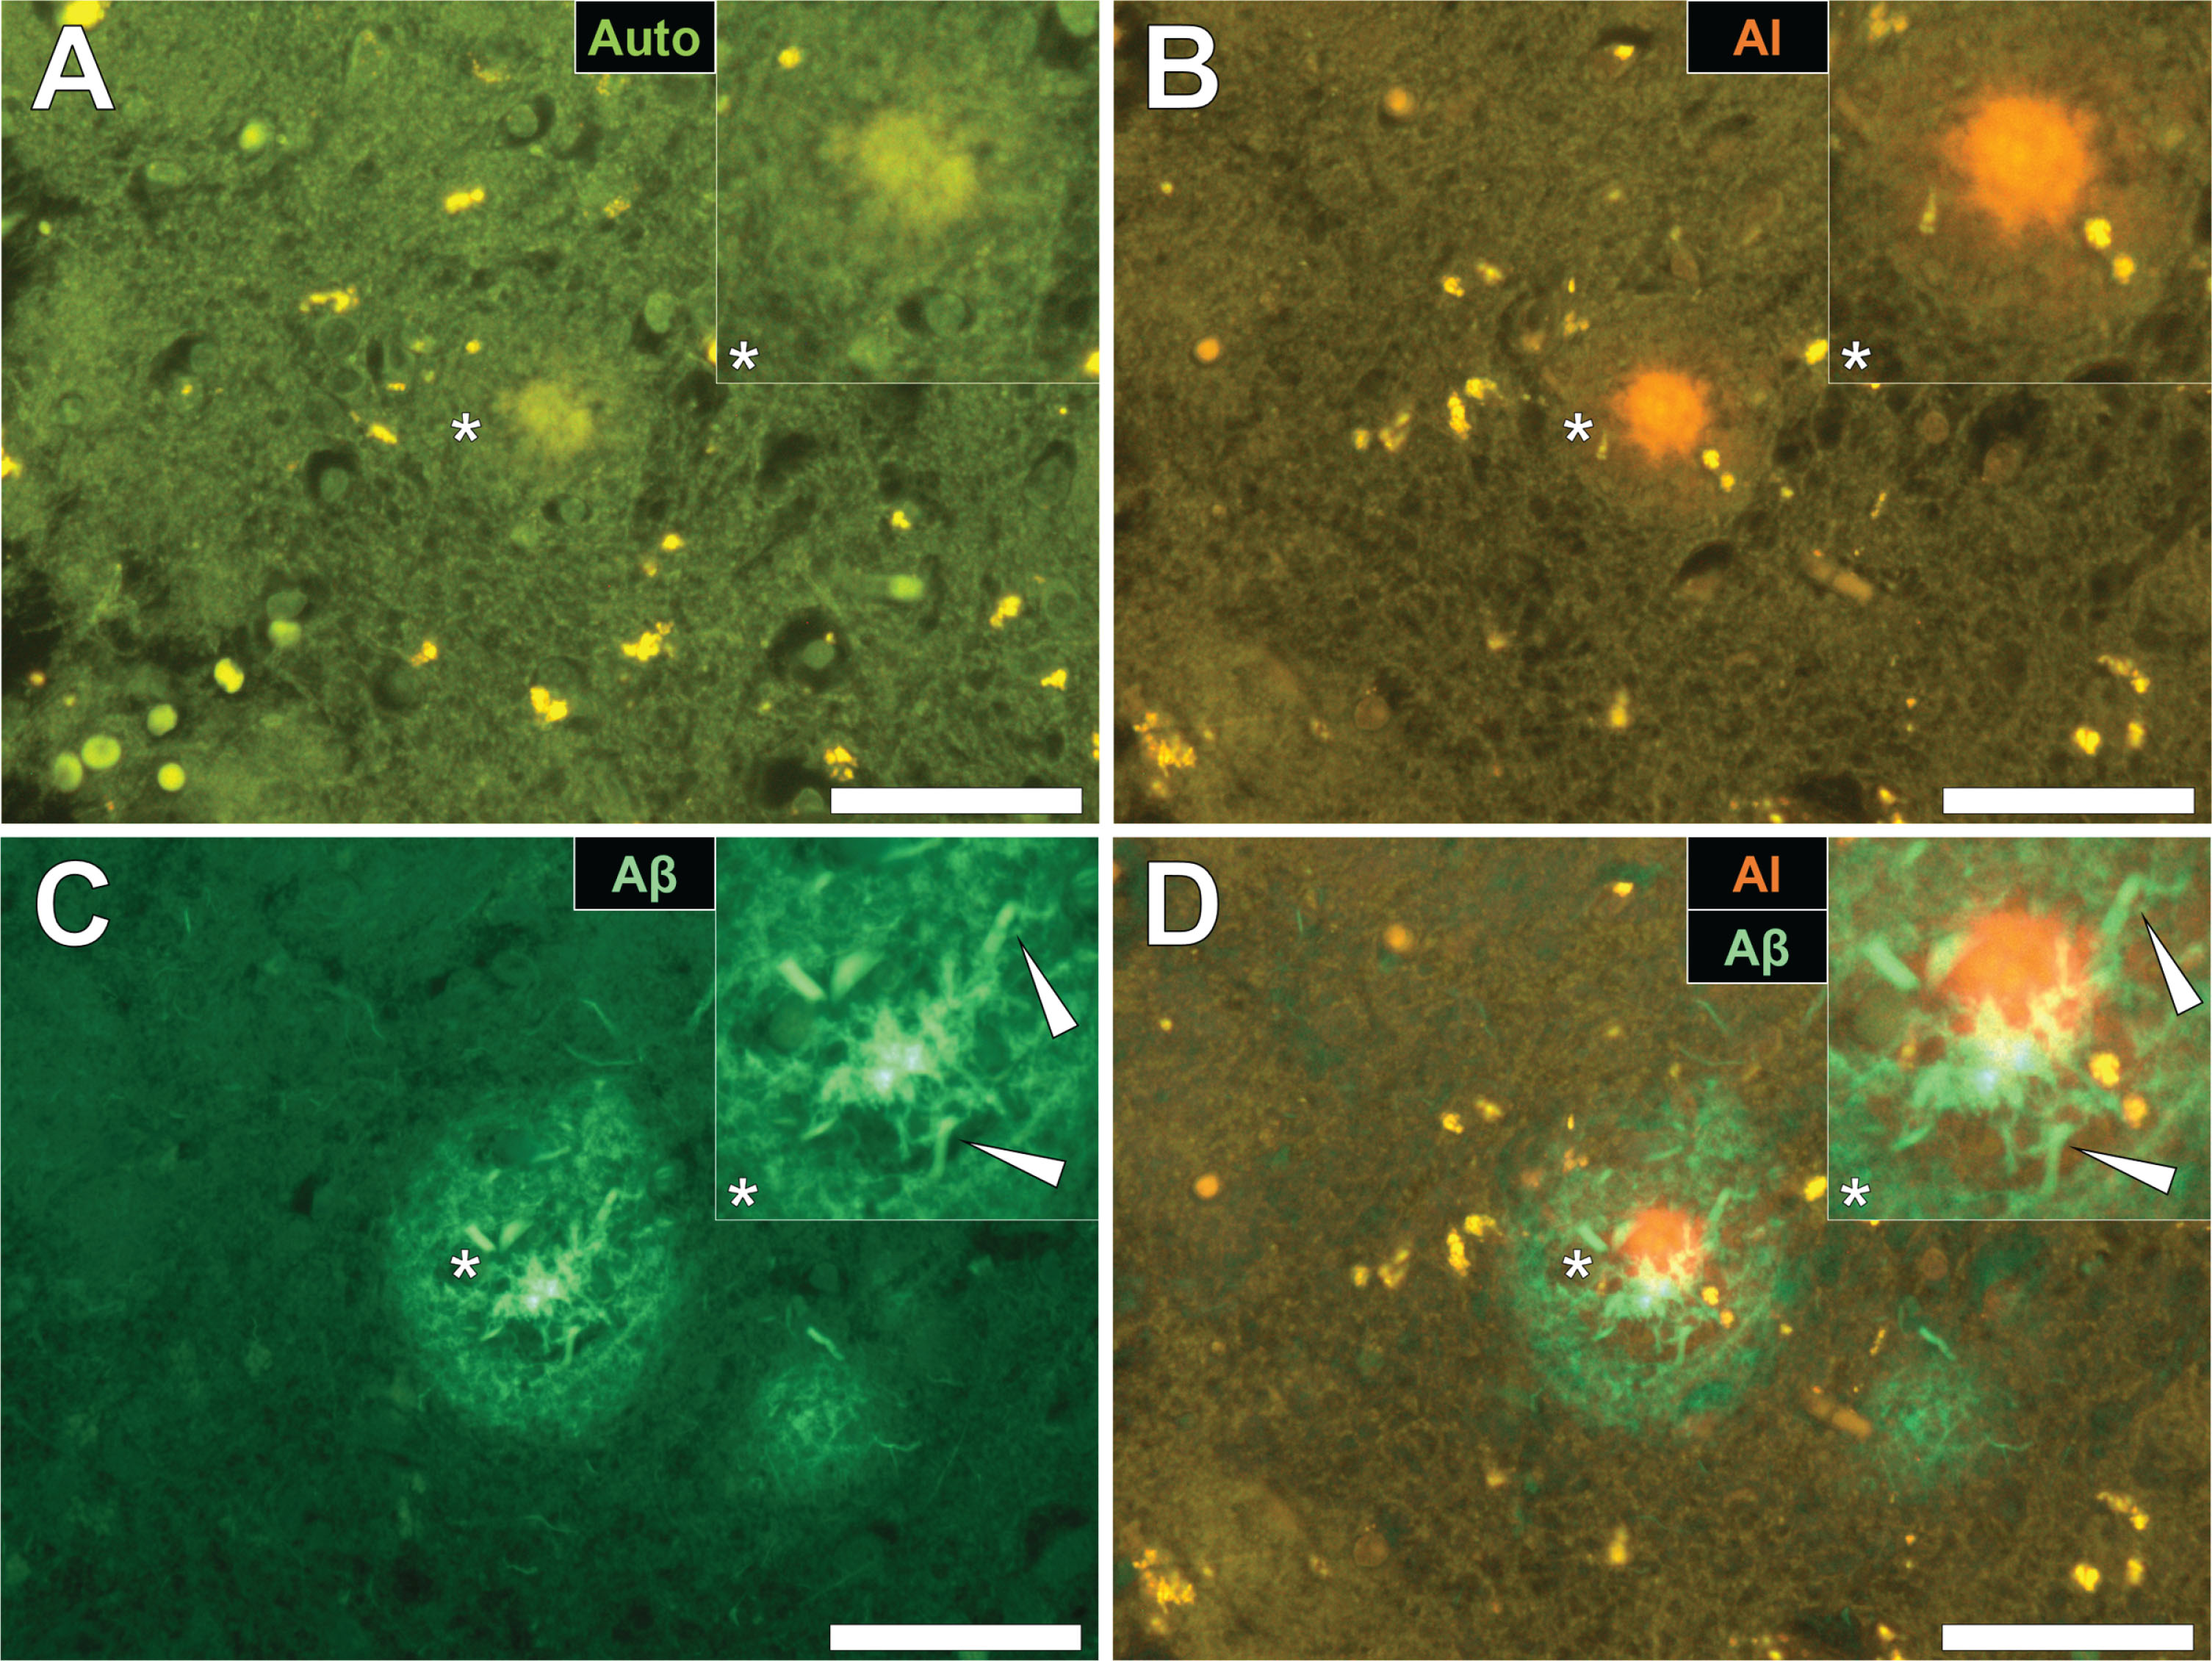 Aluminum deposition in a senile plaque in the temporal cortex of a donor with fAD. A) Autofluorescence of the non-stained section revealed a weak green fluorescence emission of a plaque-like structure. B) Aluminum identified as orange fluorescence upon lumogallion staining. C) ThS staining showed the presence of a senile plaque via an intense green fluorescence emission. D) Merging of the lumogallion and ThS fluorescence channels identified aluminum at the core of the senile plaque with ThS reactive threads of amyloid-β identified at its periphery (white arrows). Magnified inserts are denoted by asterisks in the respective fluorescence micrographs. Magnification: X 400, scale bars = 50 μm.